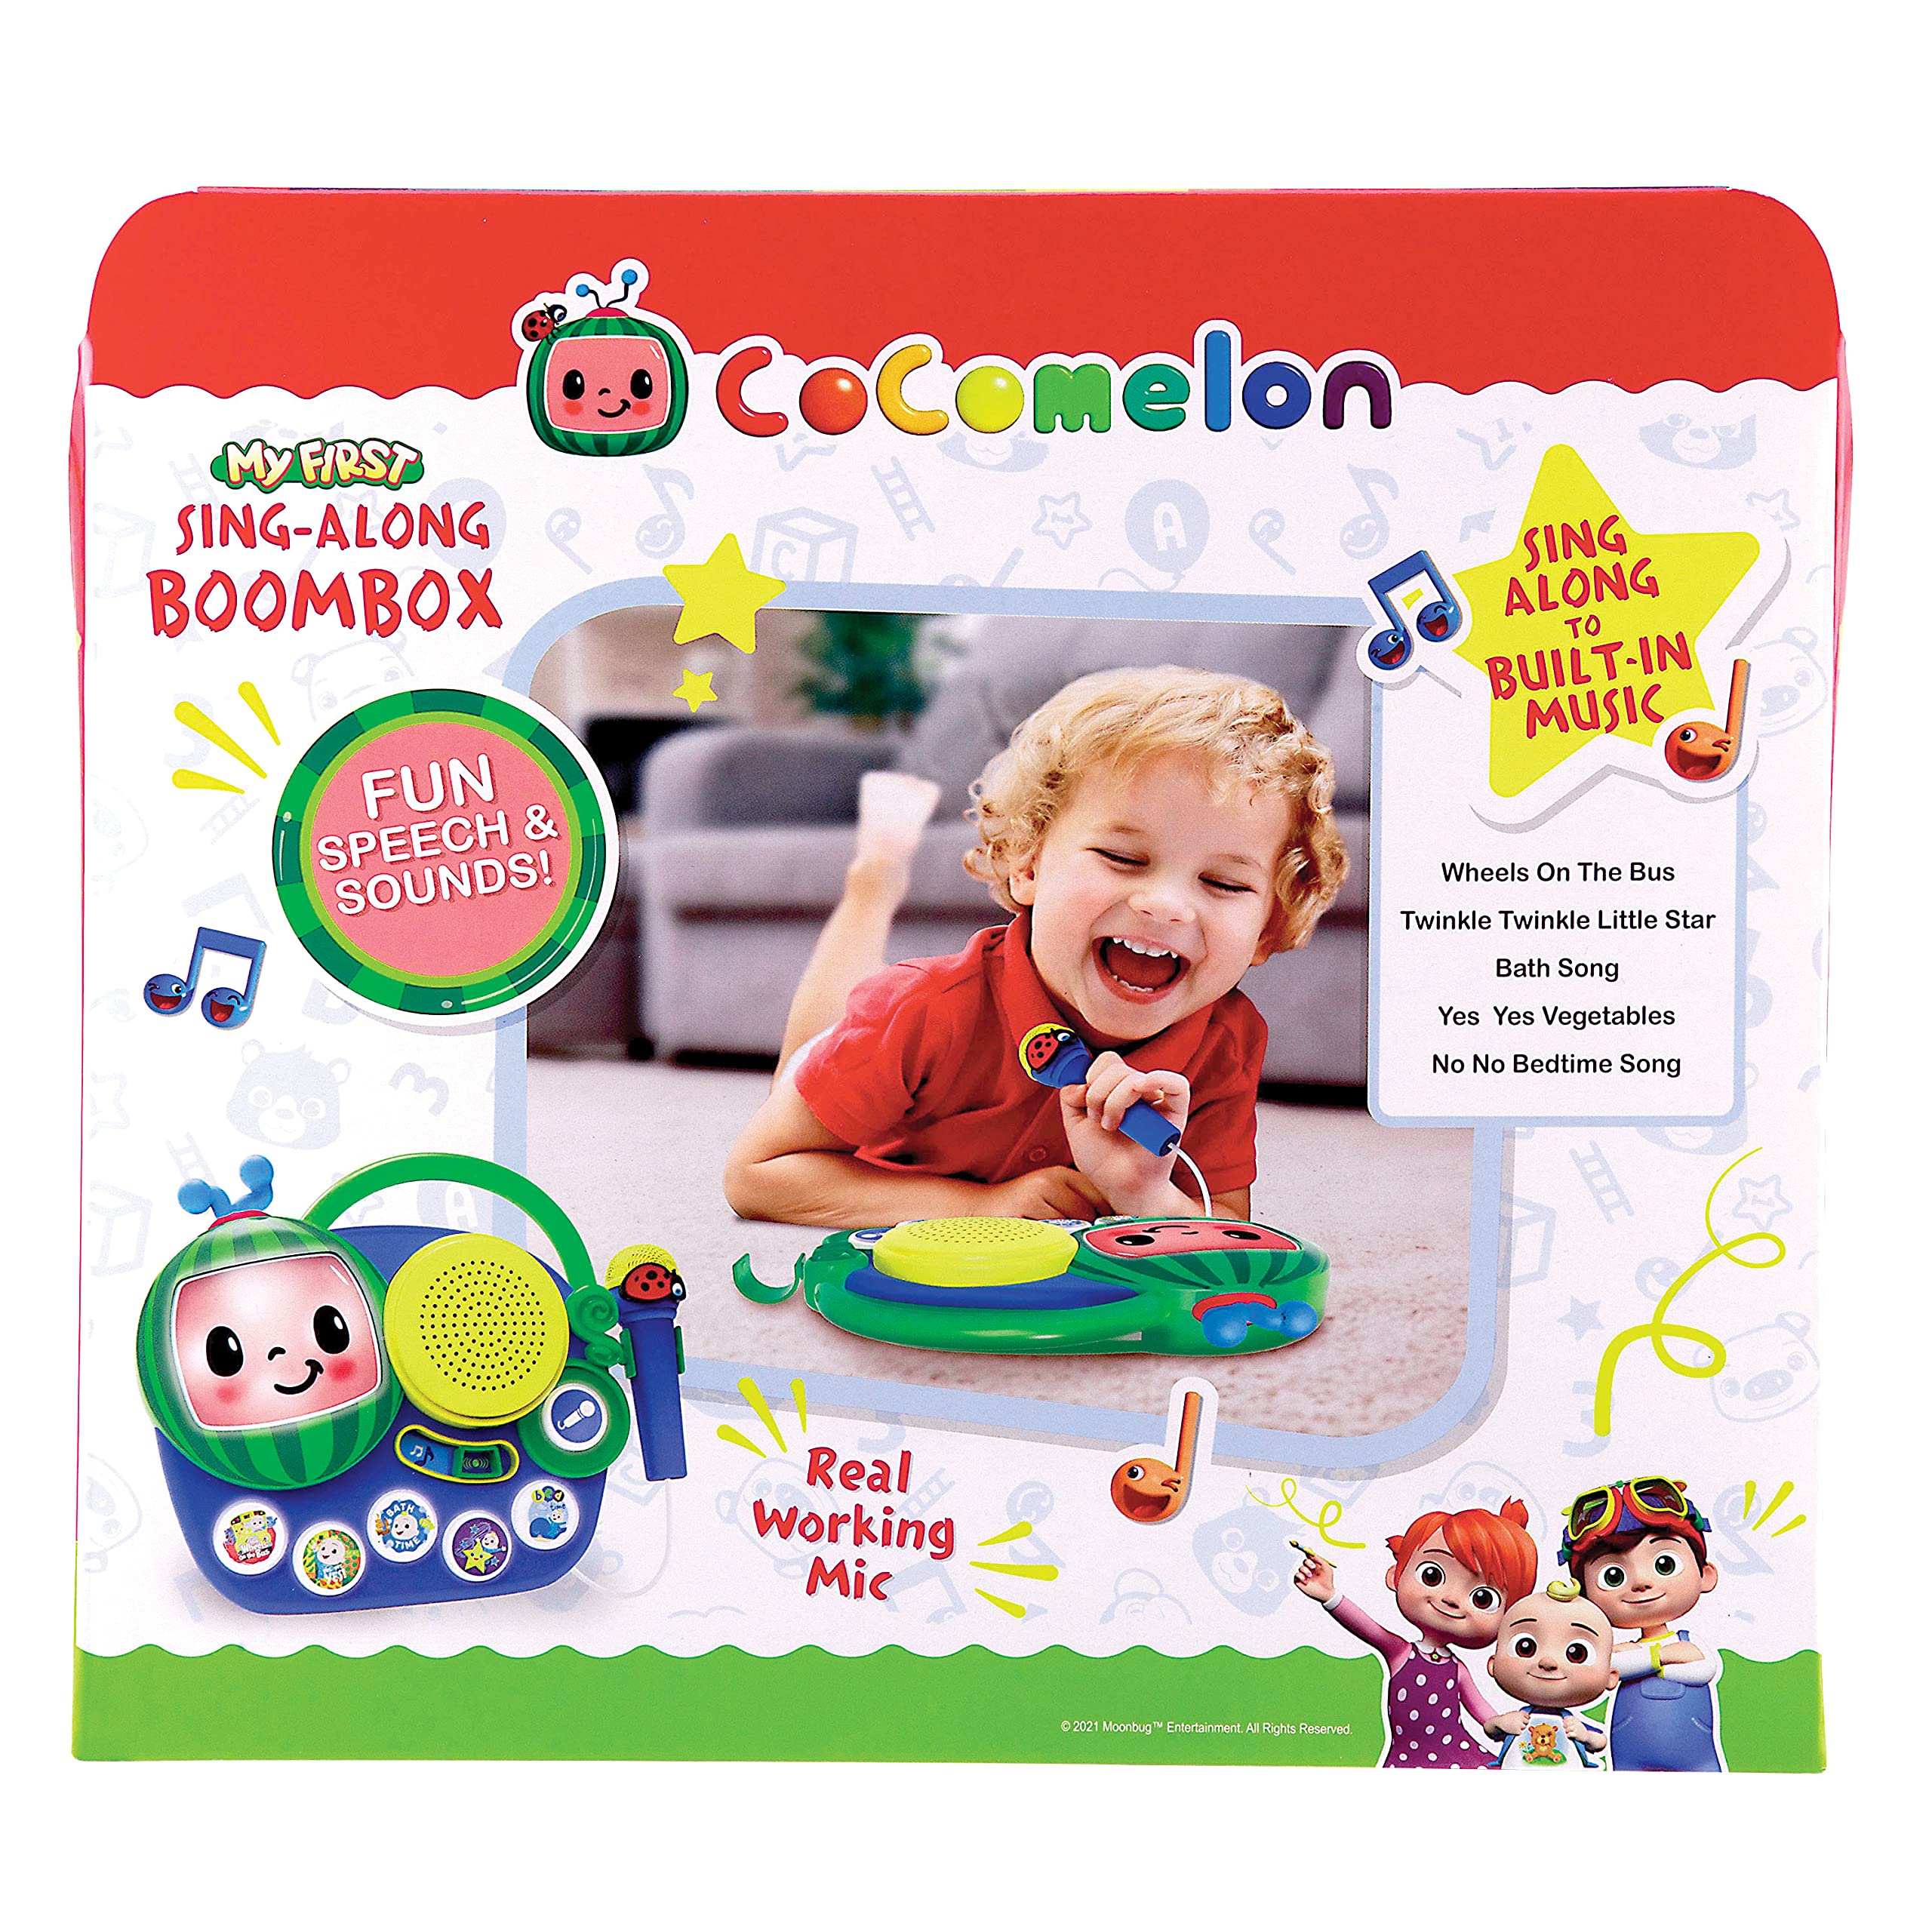 eKids Auxiliary Cocomelon Toy Singalong Boombox with Microphone for Toddlers, Built-in Music and Flashing Lights, Fans of Cocomelon Gifts